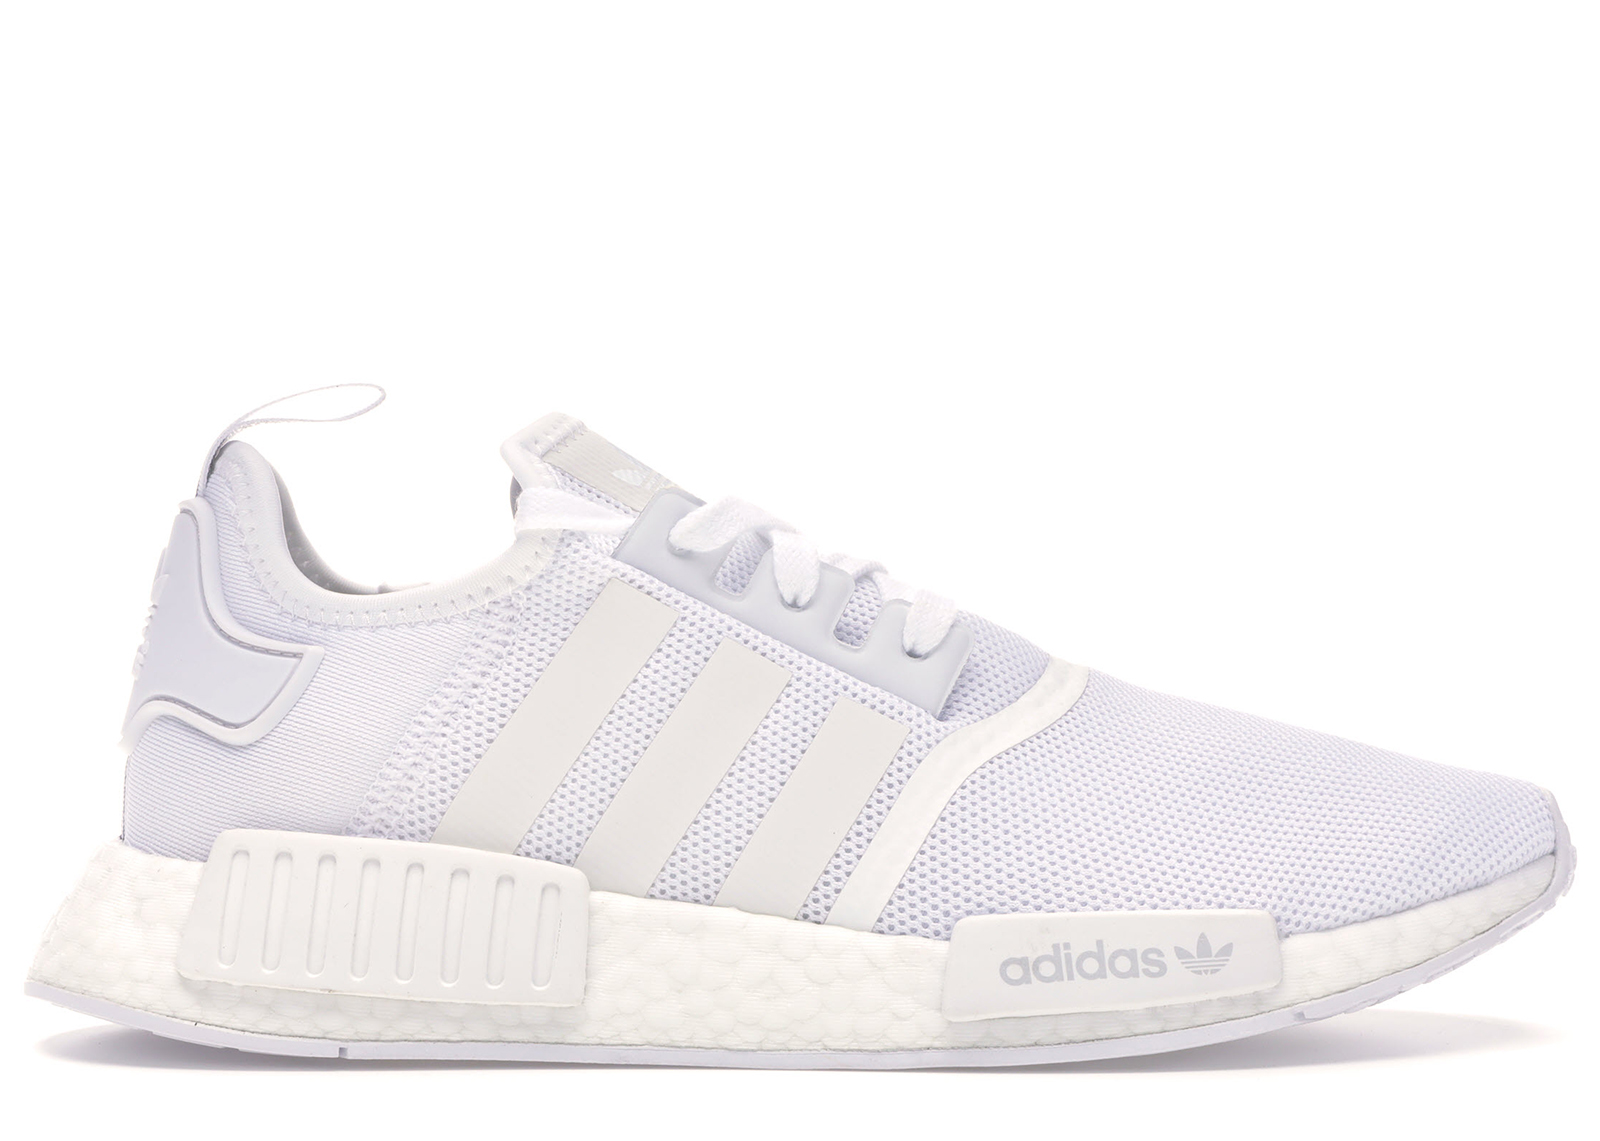 nmds white and grey